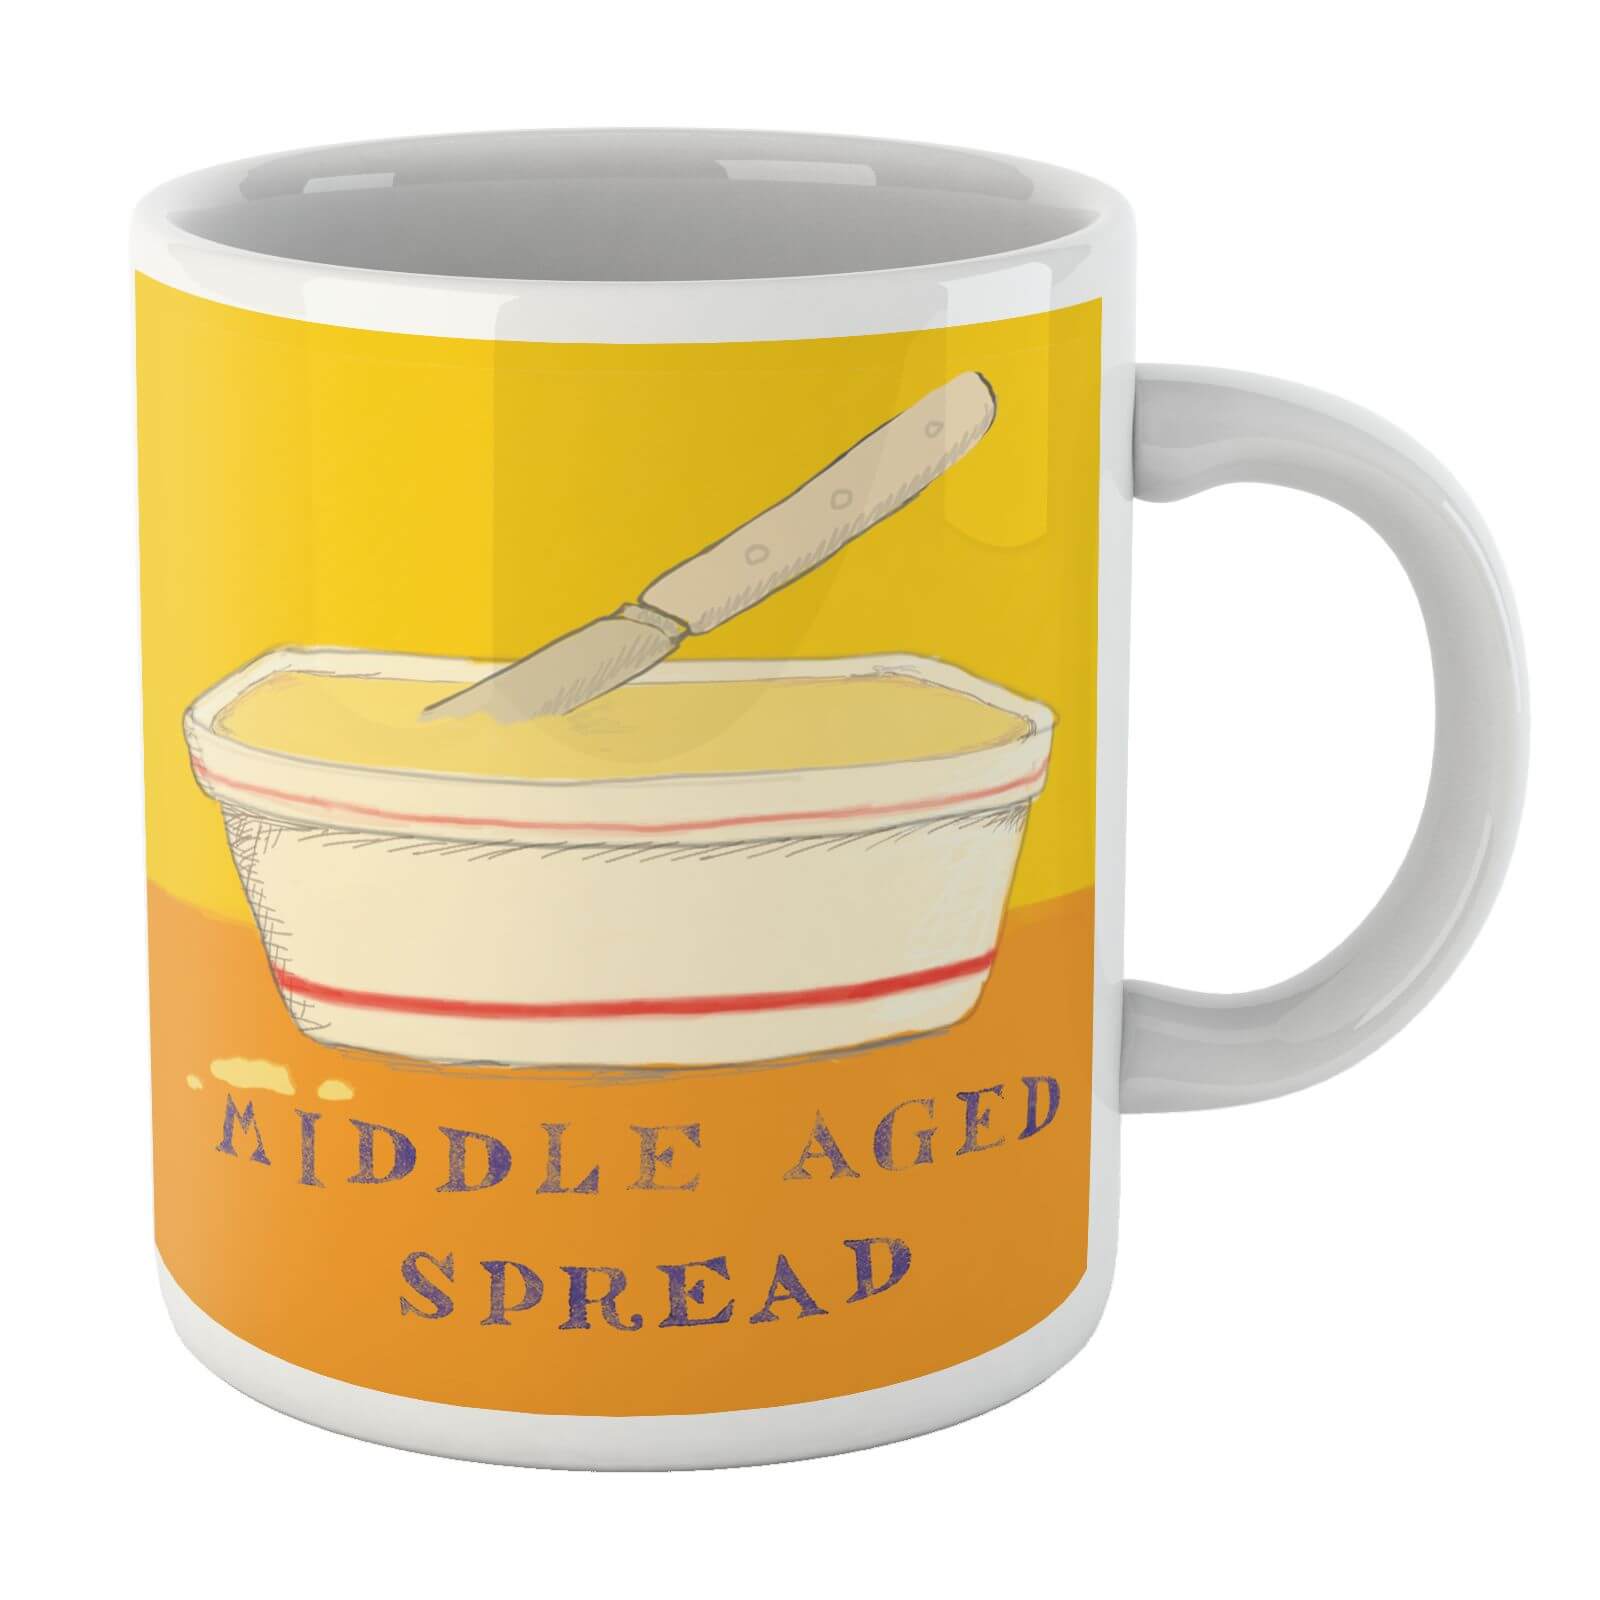 Poet and Painter Middle Aged Spread Mug